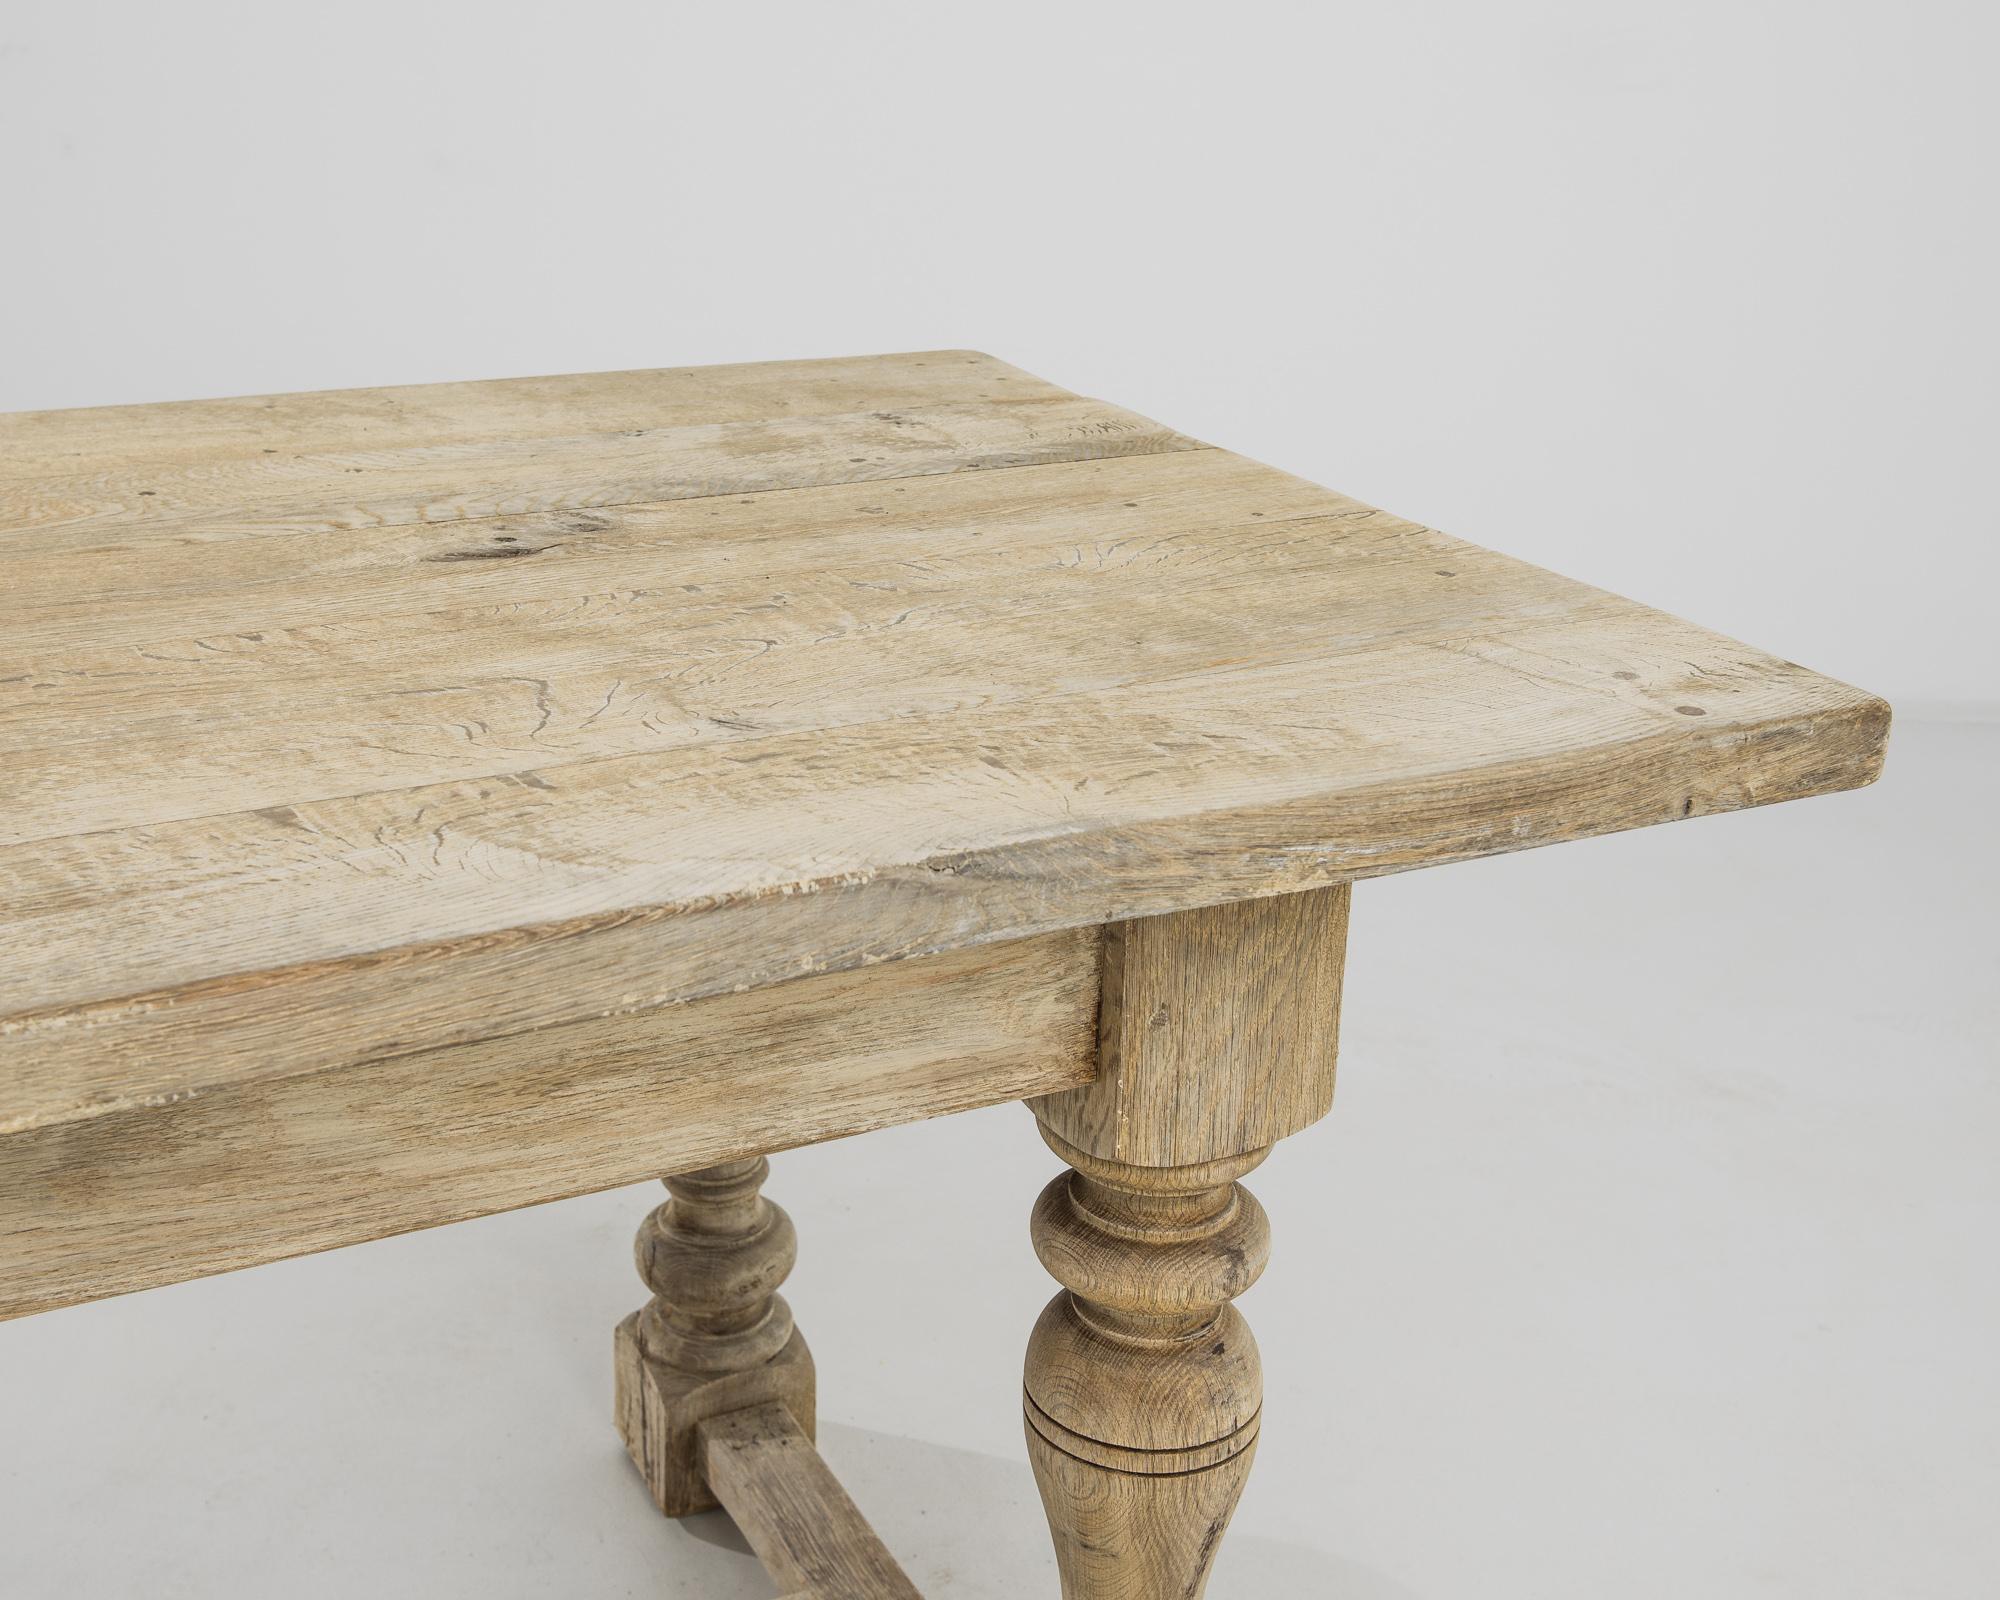 A bleached oak dining table from Belgium, produced circa 1960. Sporting a five and a half foot wide top, this sturdy table can comfortably sit a party of four to six. Stunning craftsmanship still shines through even after decades of life laden with